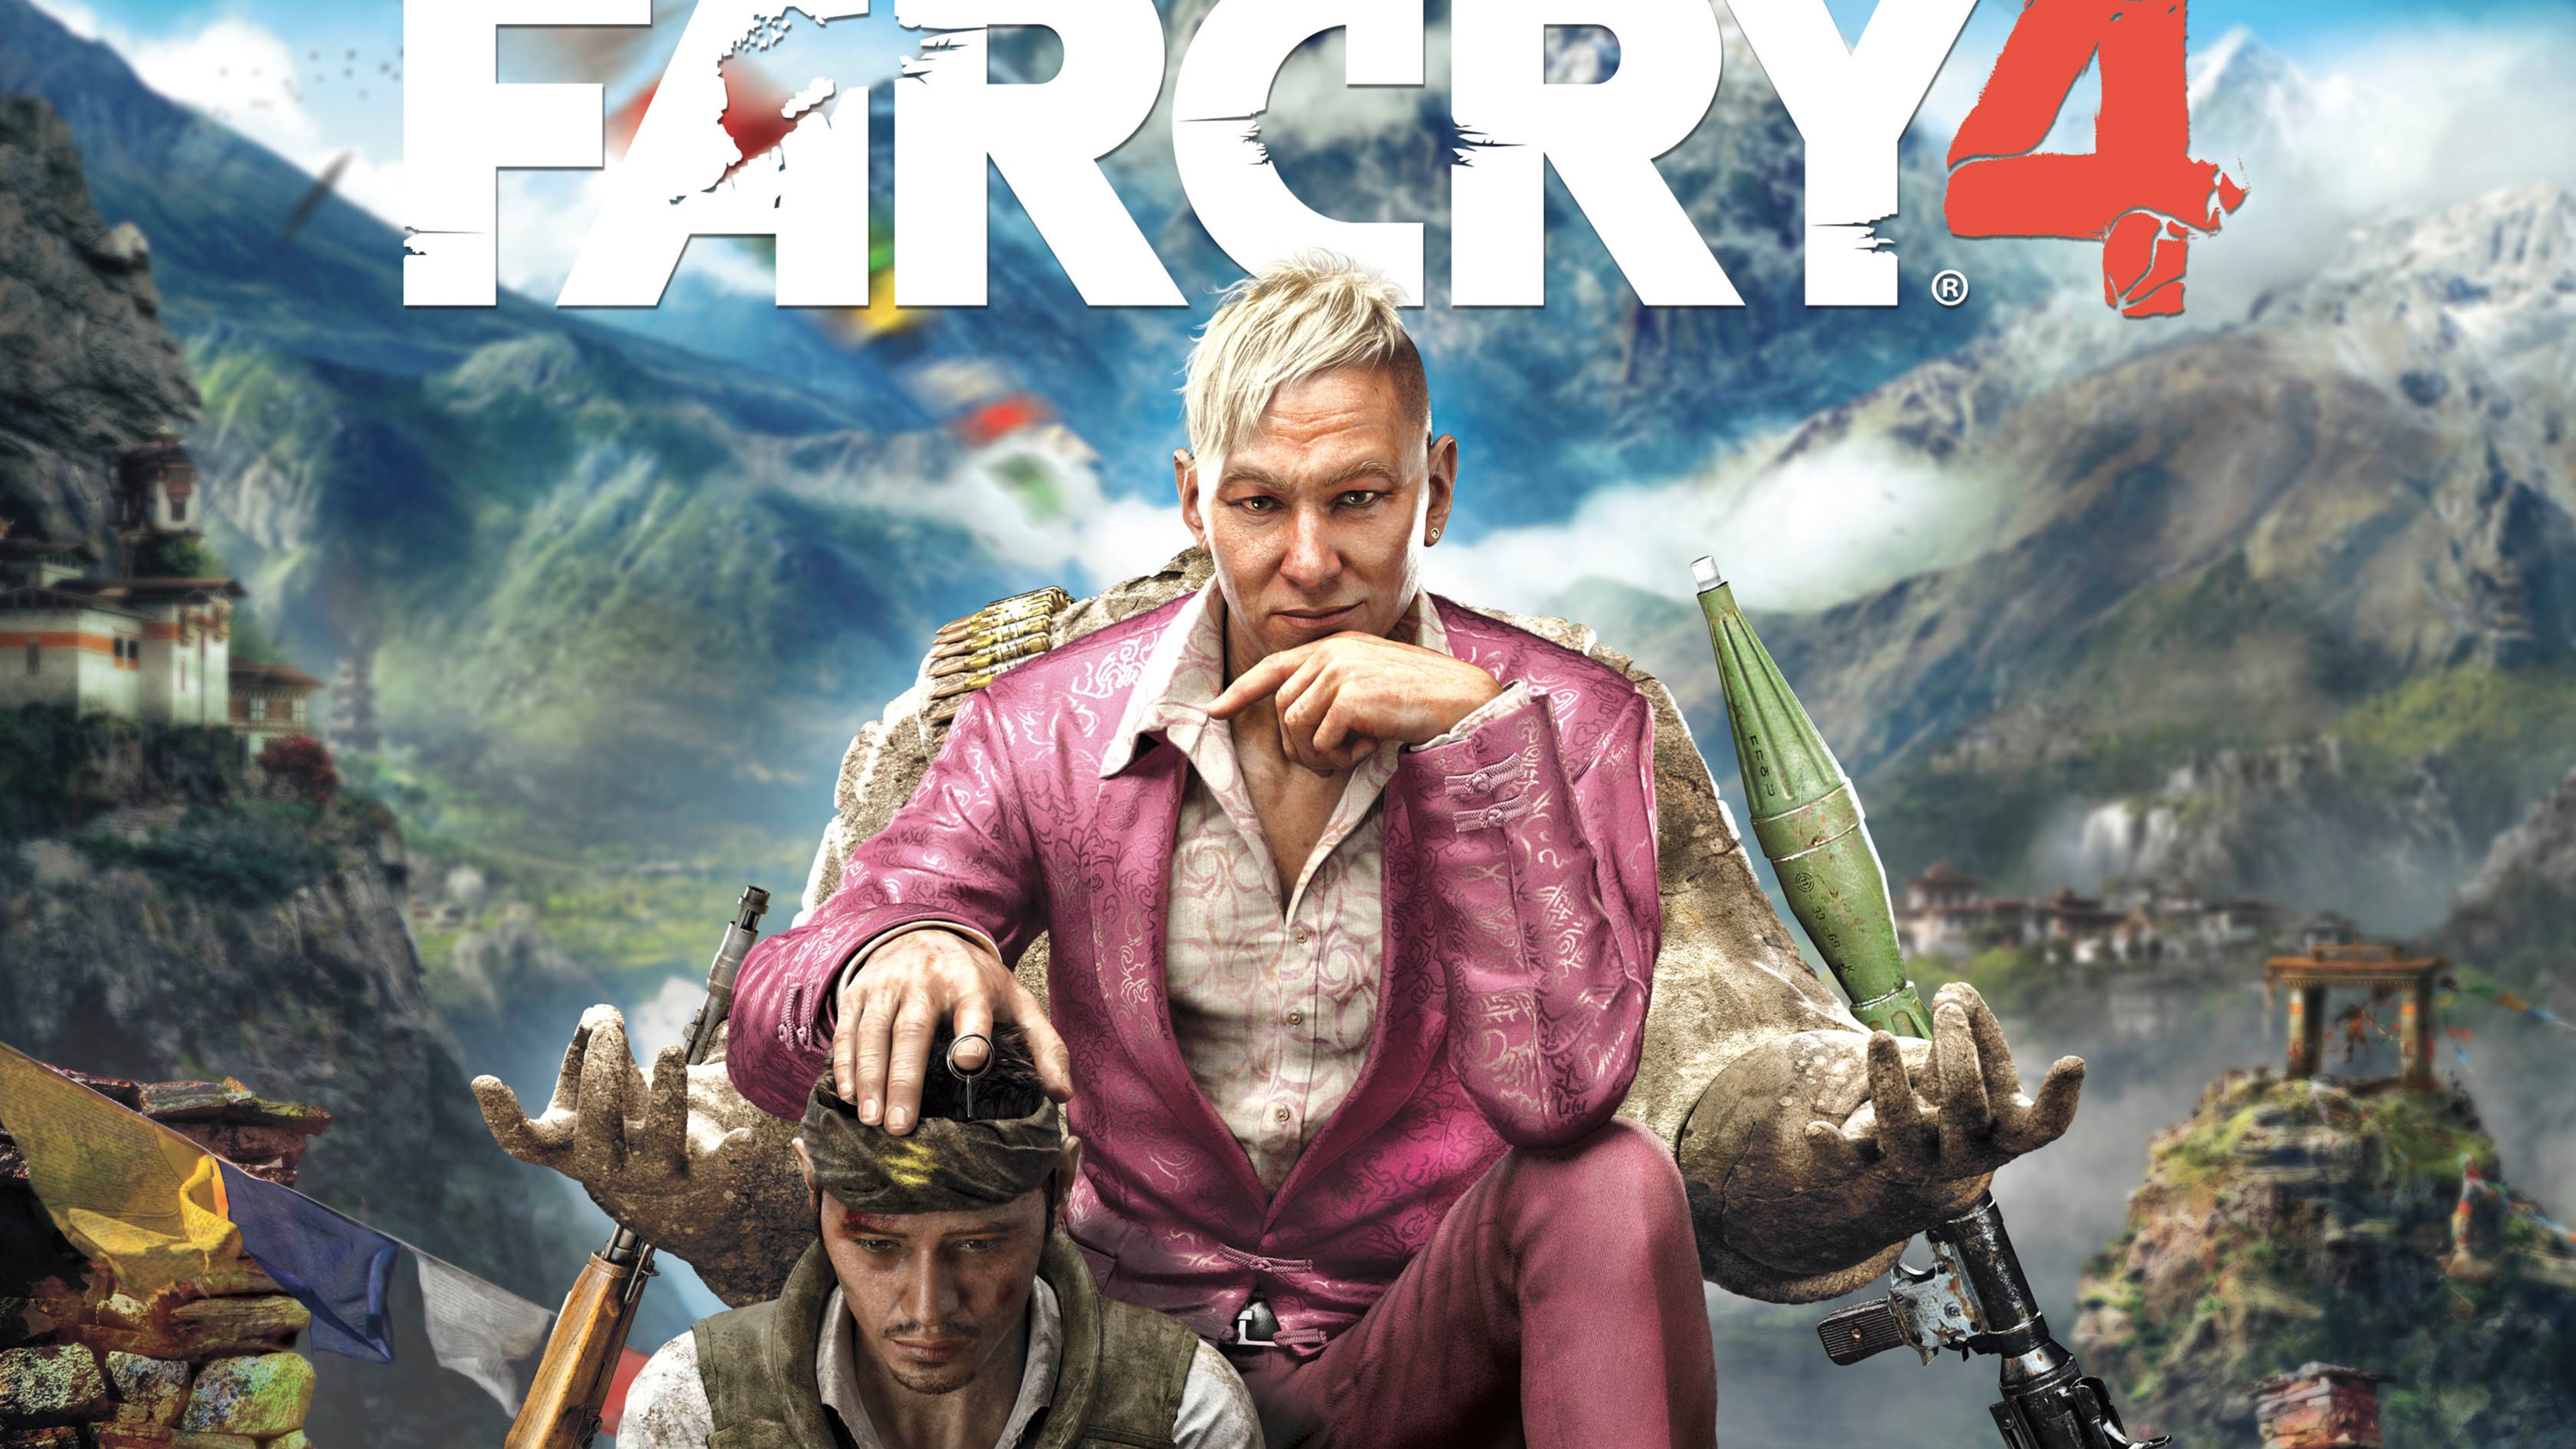 Far Cry 4 Images Wallpapers